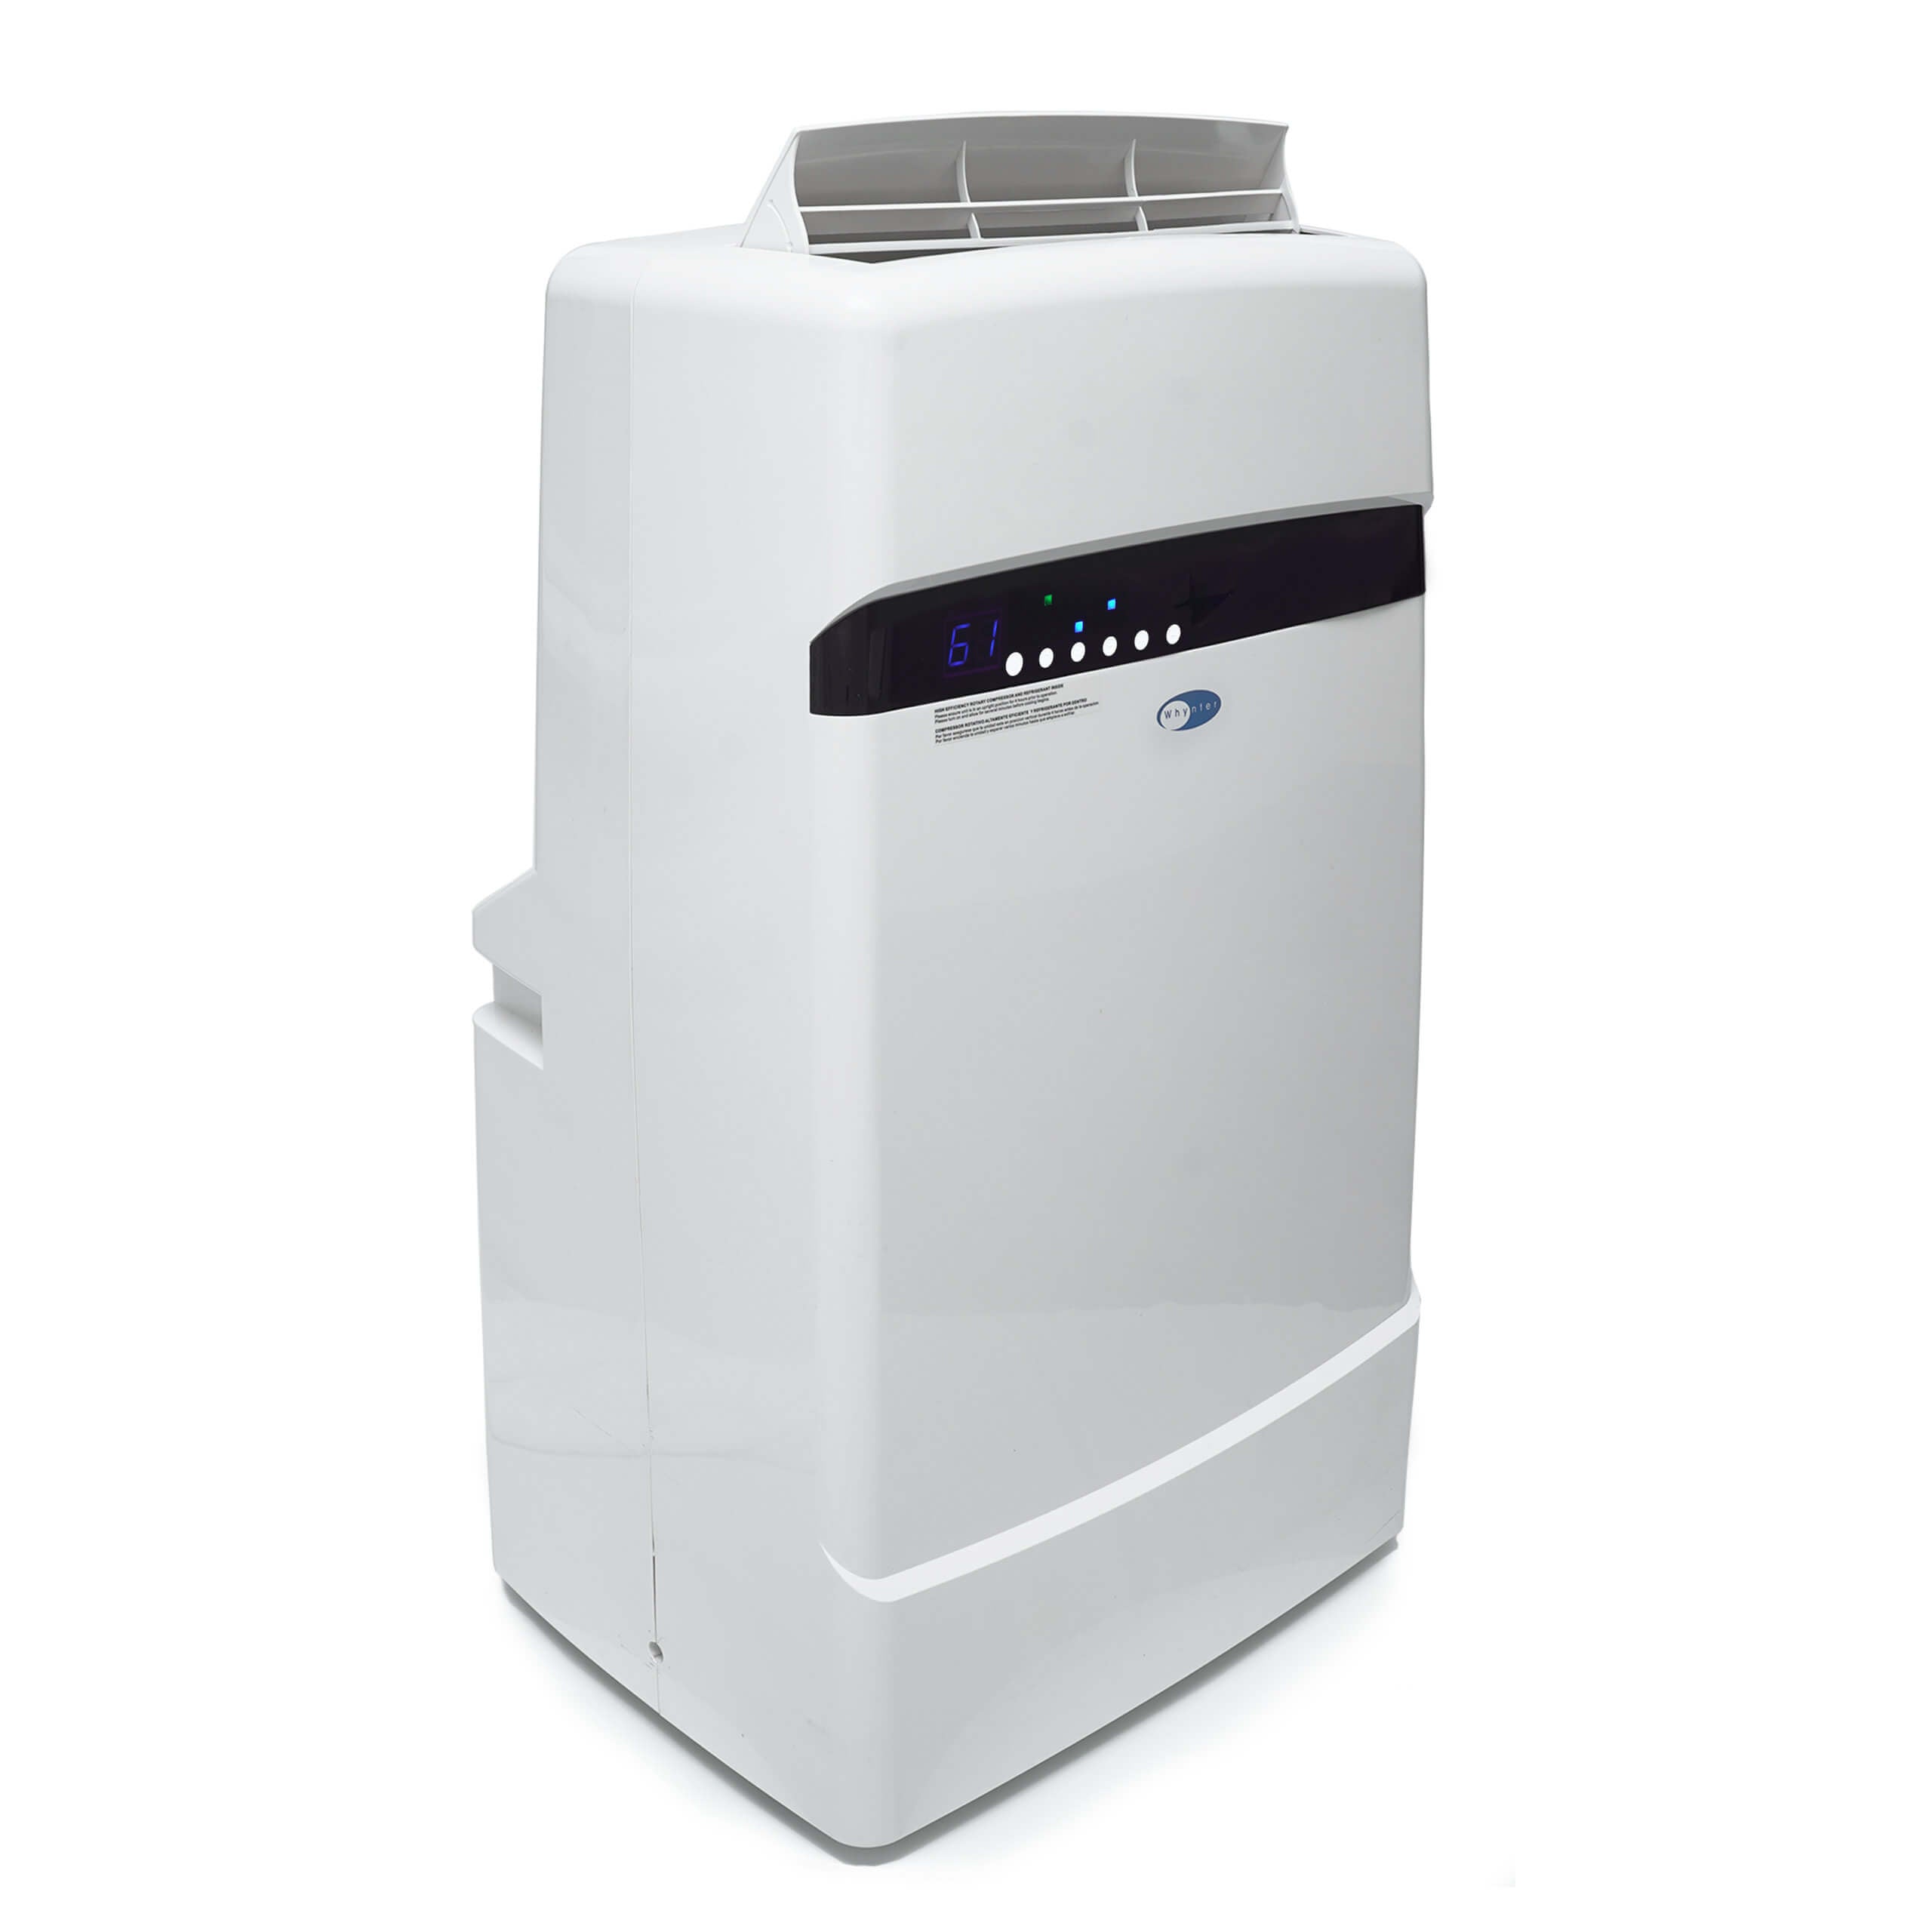 Whynter, Whynter ARC-12SDH 12,000 BTU Portable Air Conditioner Heat with Dehumidifier New